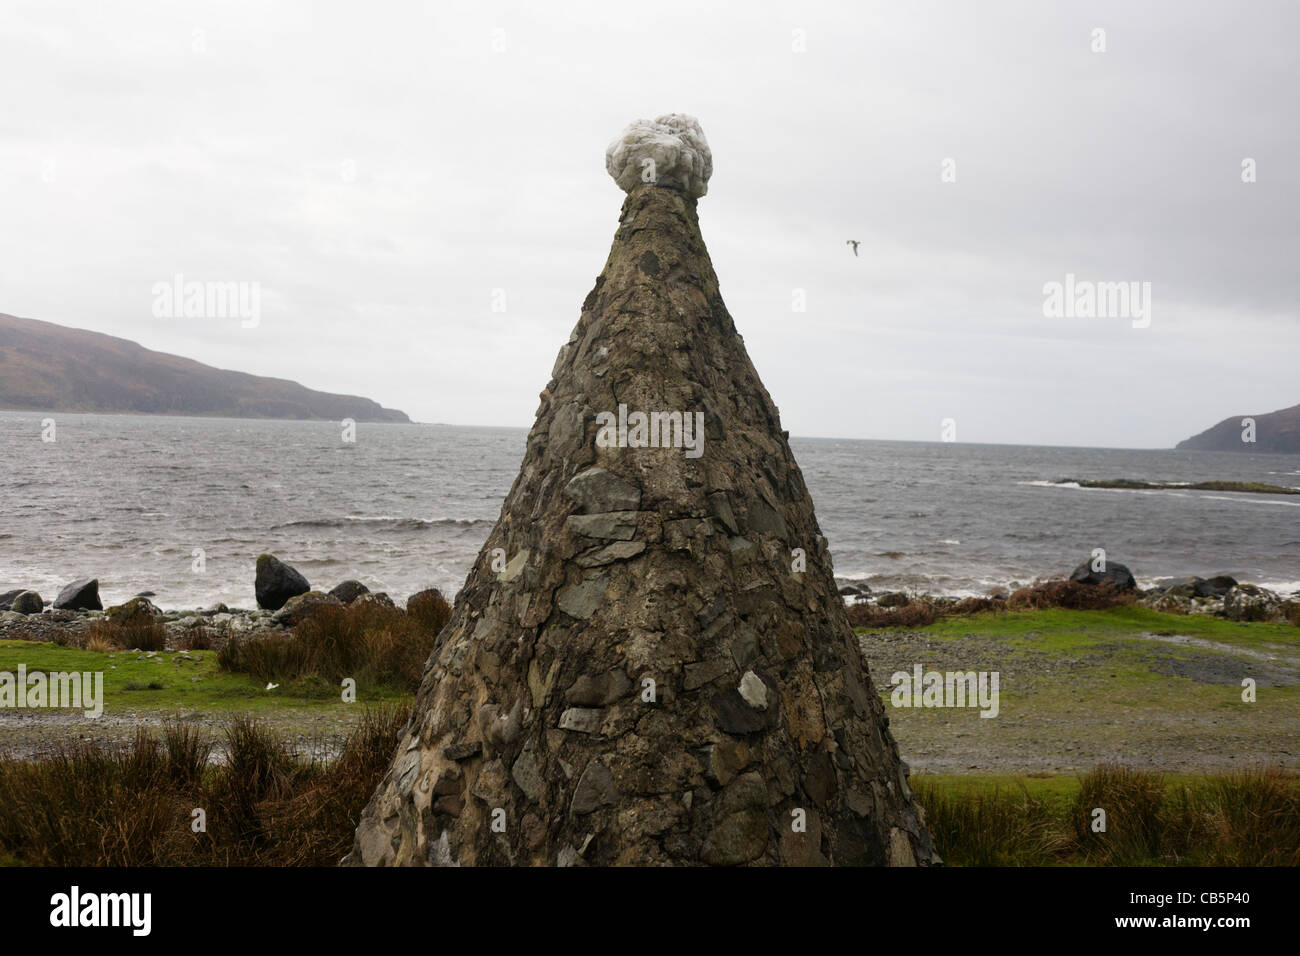 Pyramid commemorating coronation in 1902 of King Edward and Queen Alexandra. Lochbuie, Isle of Mull, Scotland. Stock Photo